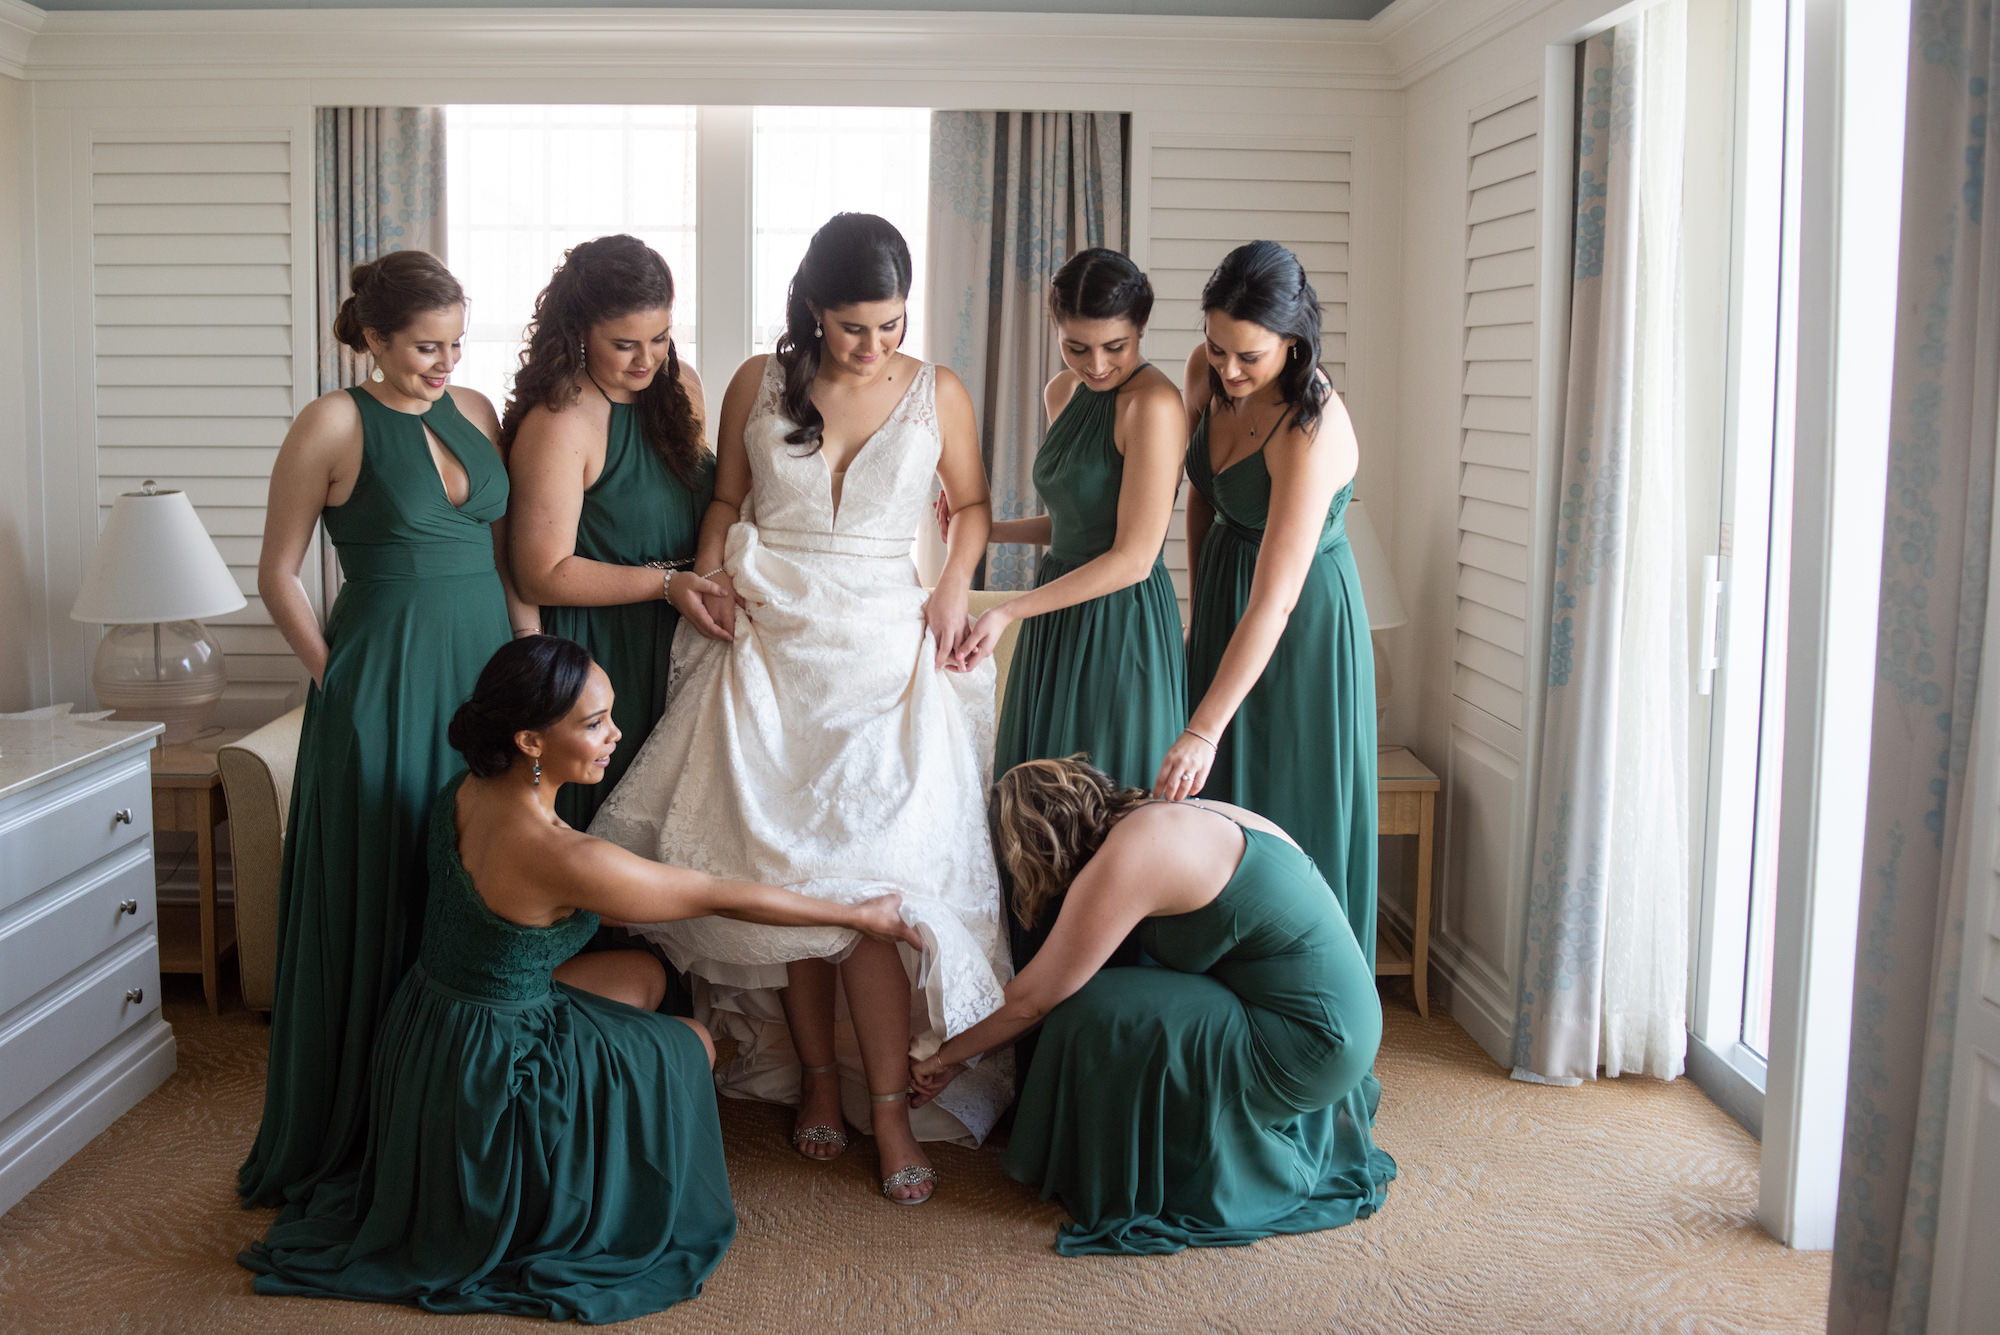 Tampa Bay Bride in Deep V Neckline Double Beaded Bands Across Waist, Paloma Blanca Lace Wedding Dress, Bridesmaids in Dark Green Mix and Match Azazie Dresses Getting Ready Wedding Portrait